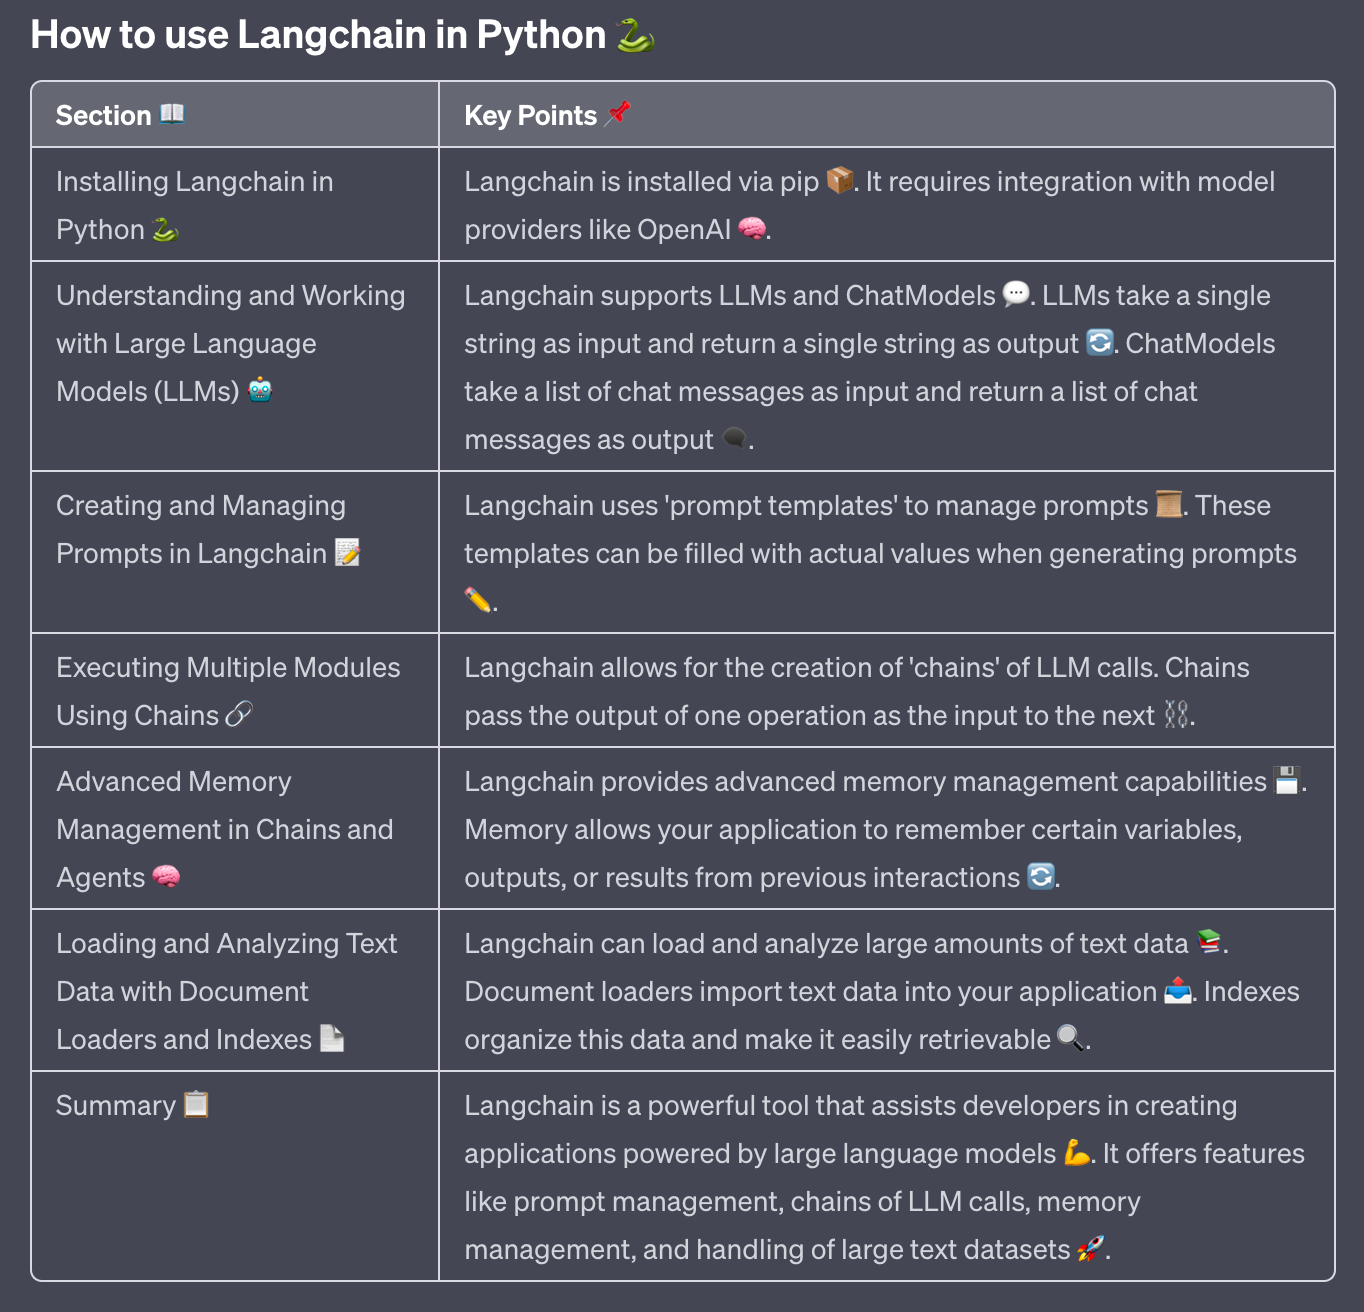 Summary table of the key steps and things to know for using Langchain in python